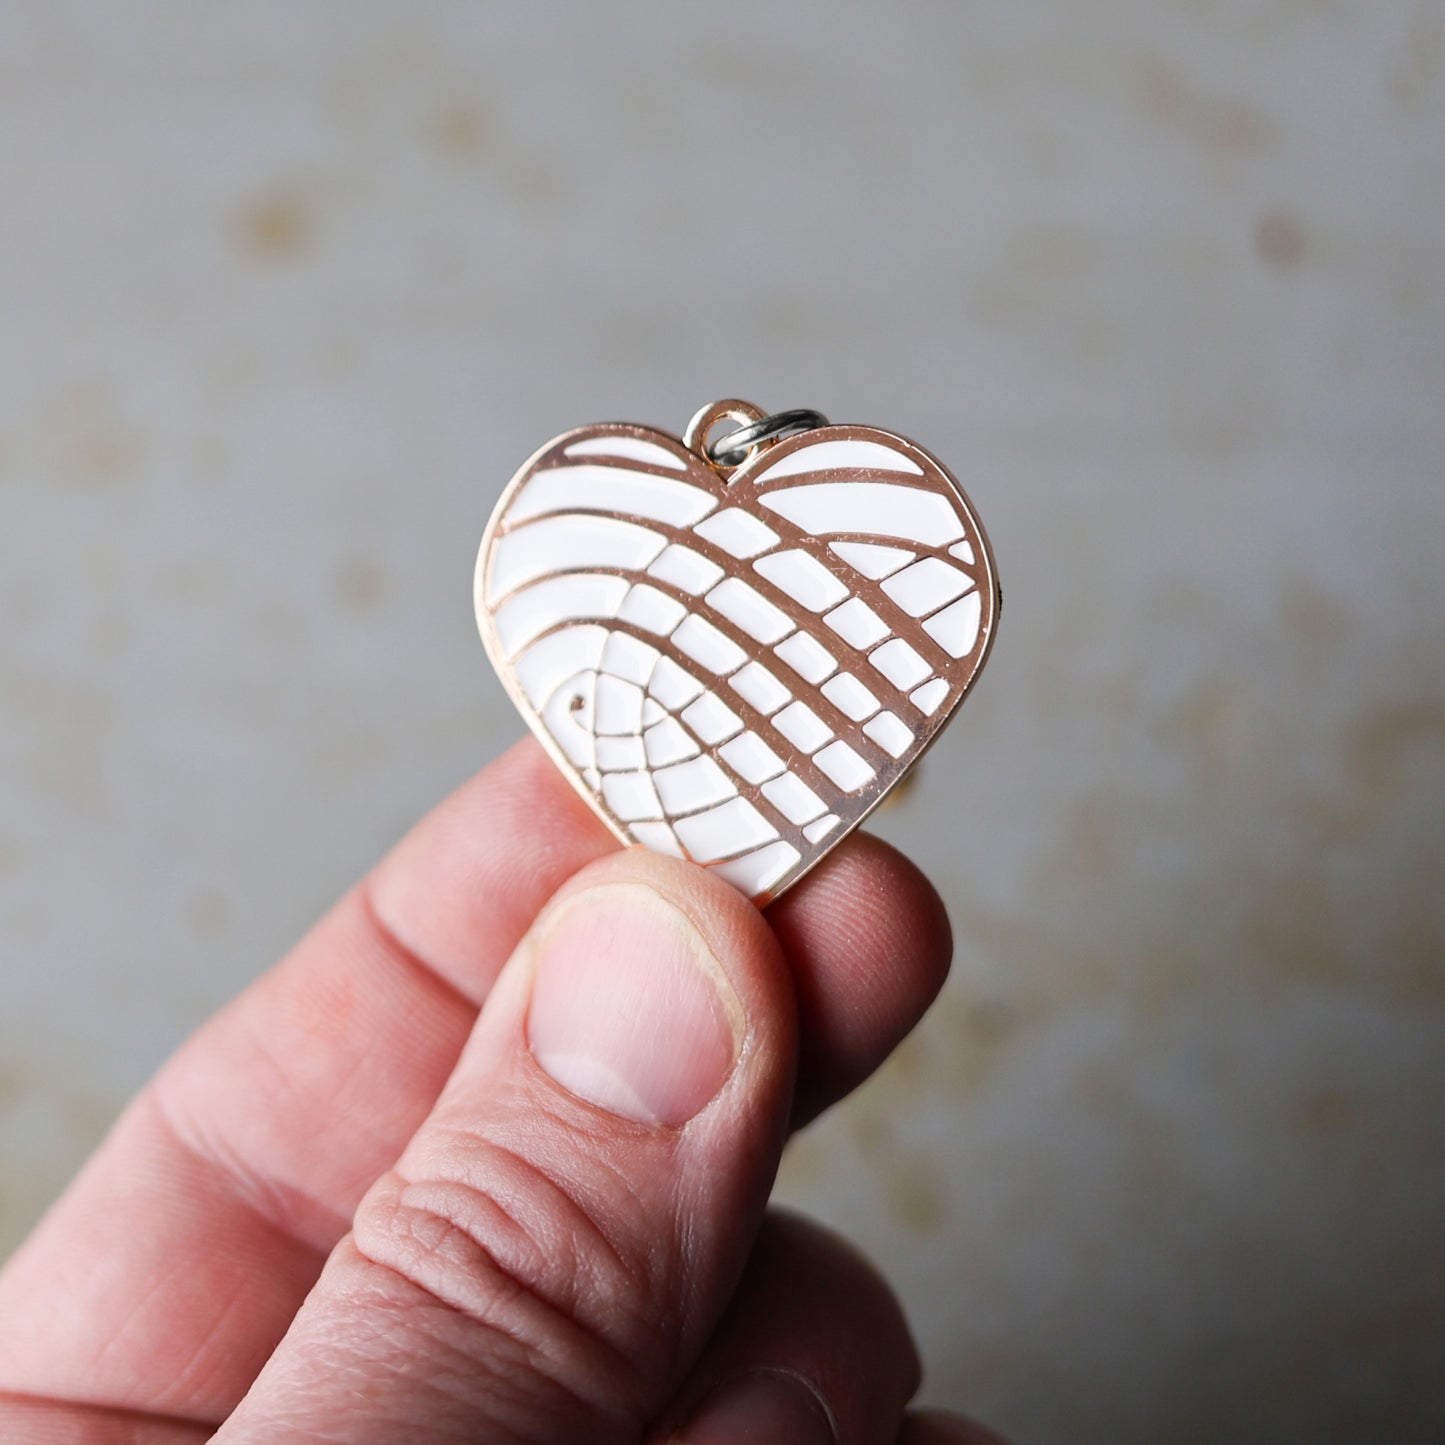 Load image into Gallery viewer, Enamel Heart Keychains
